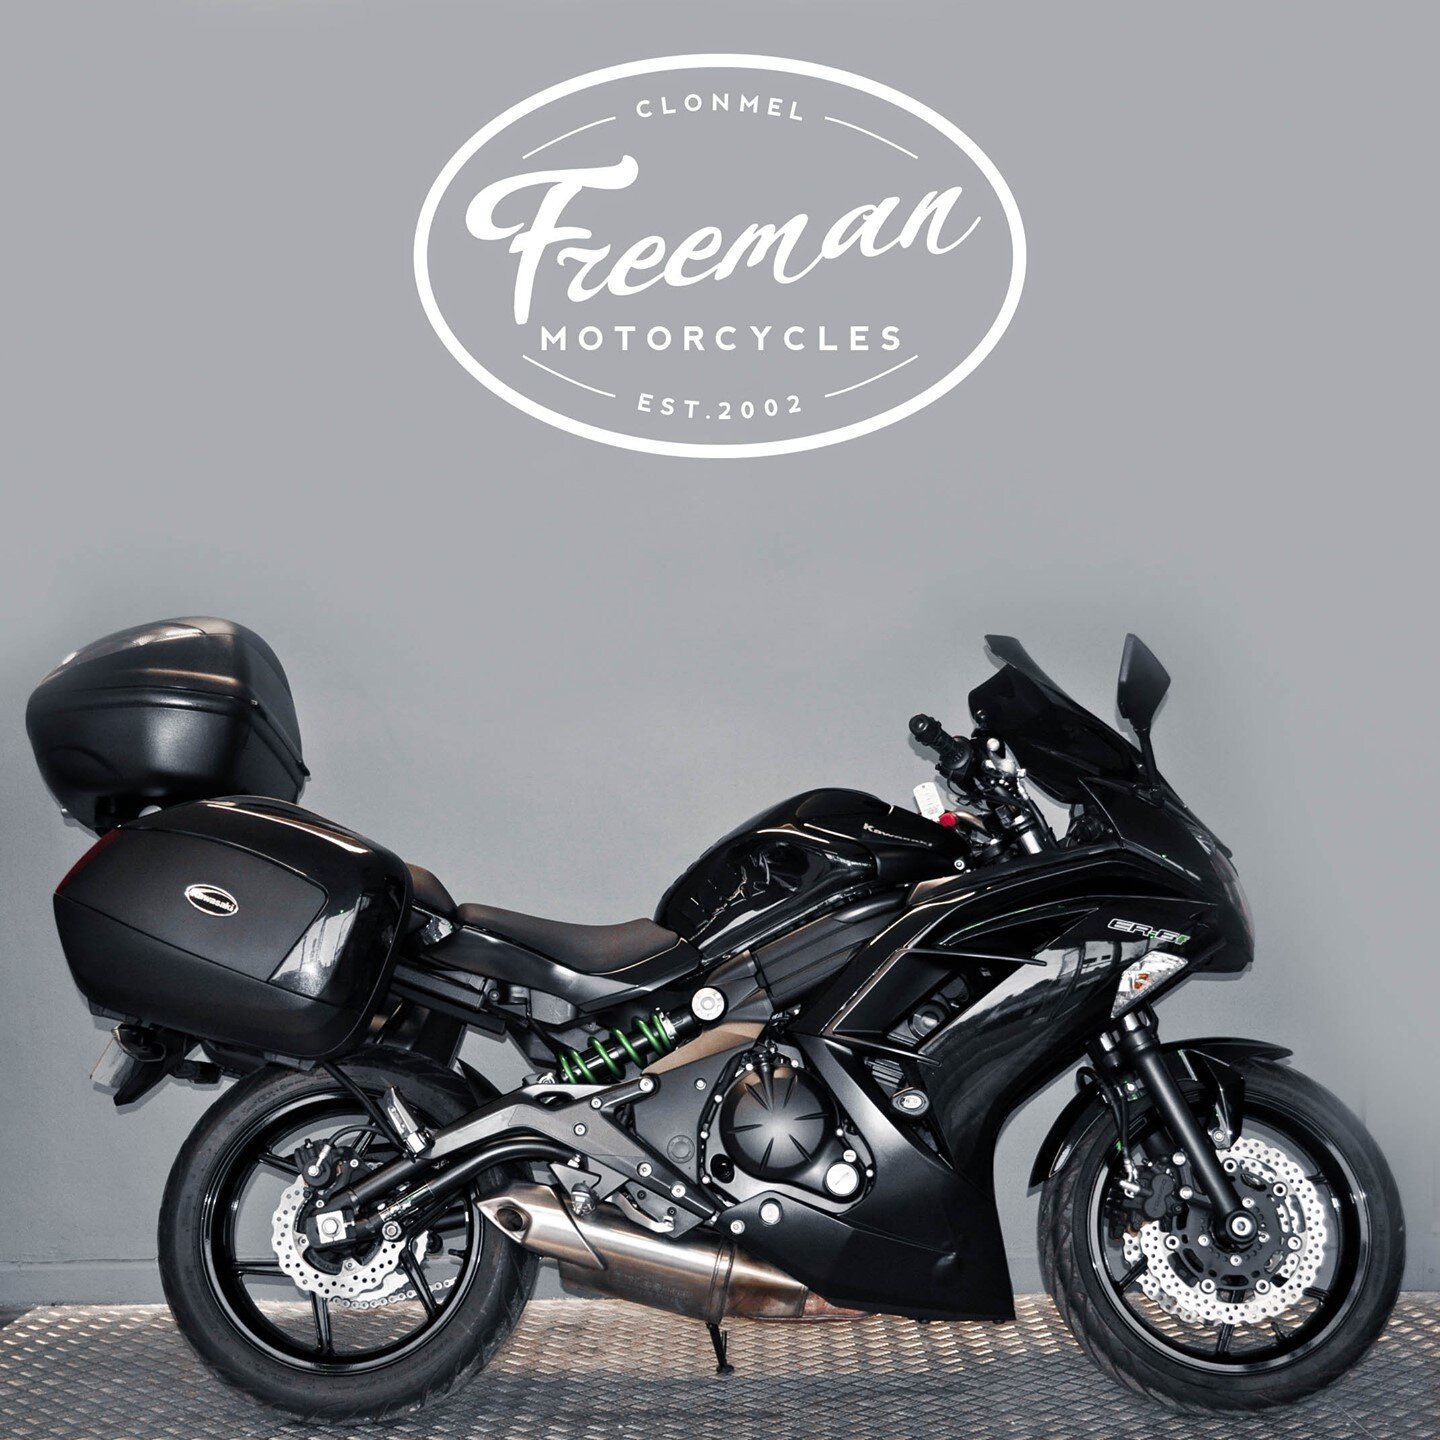 2015 Kawasaki ER 6 f ***Low Miles****⁠
&euro; 5,995⁠
⁠
4,057 mi⁠
650 cc⁠
Presented in showroom Condition⁠
2Keys ⁠
Full Hard Case ⁠
Givi Luggage with all keys ⁠
72 HP⁠
53kw ⁠
Seat height 31.7 inches⁠
Phone &amp; Sat Nav Holder⁠
GL Pro Gear Indicator ⁠